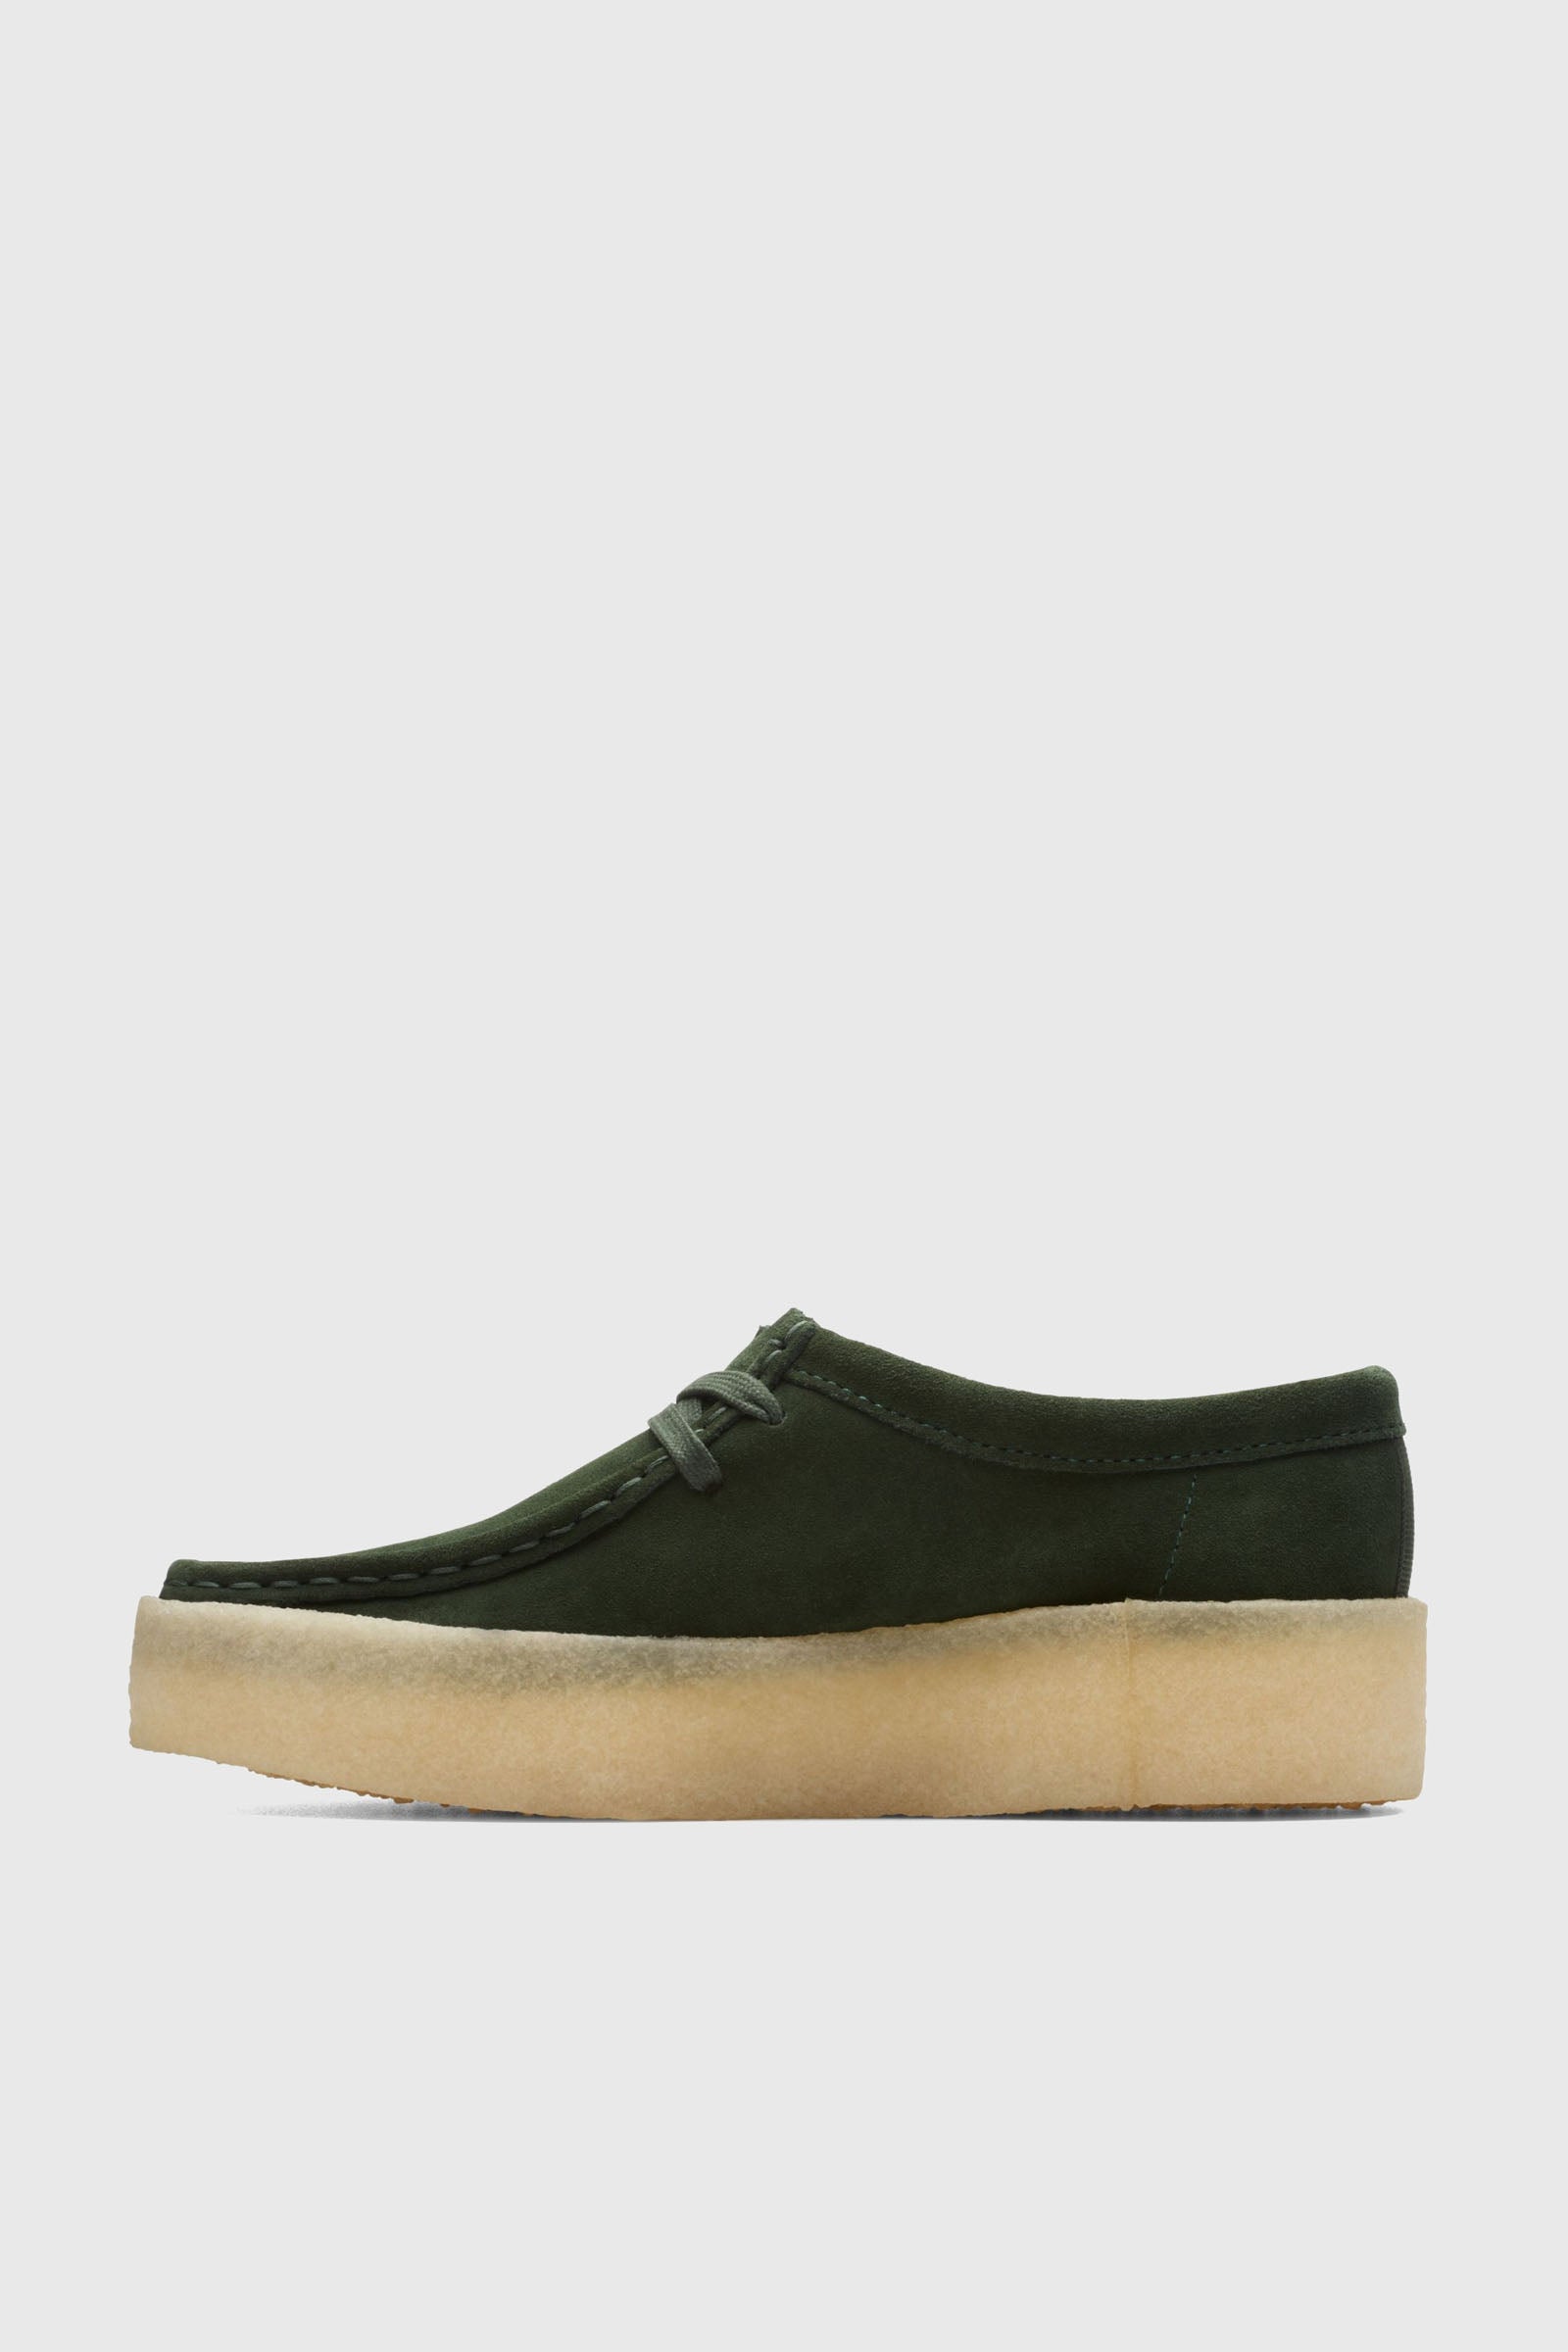 Clarks Wallabee Cup Leather Shoes in Dark Green/Dark Green - 8